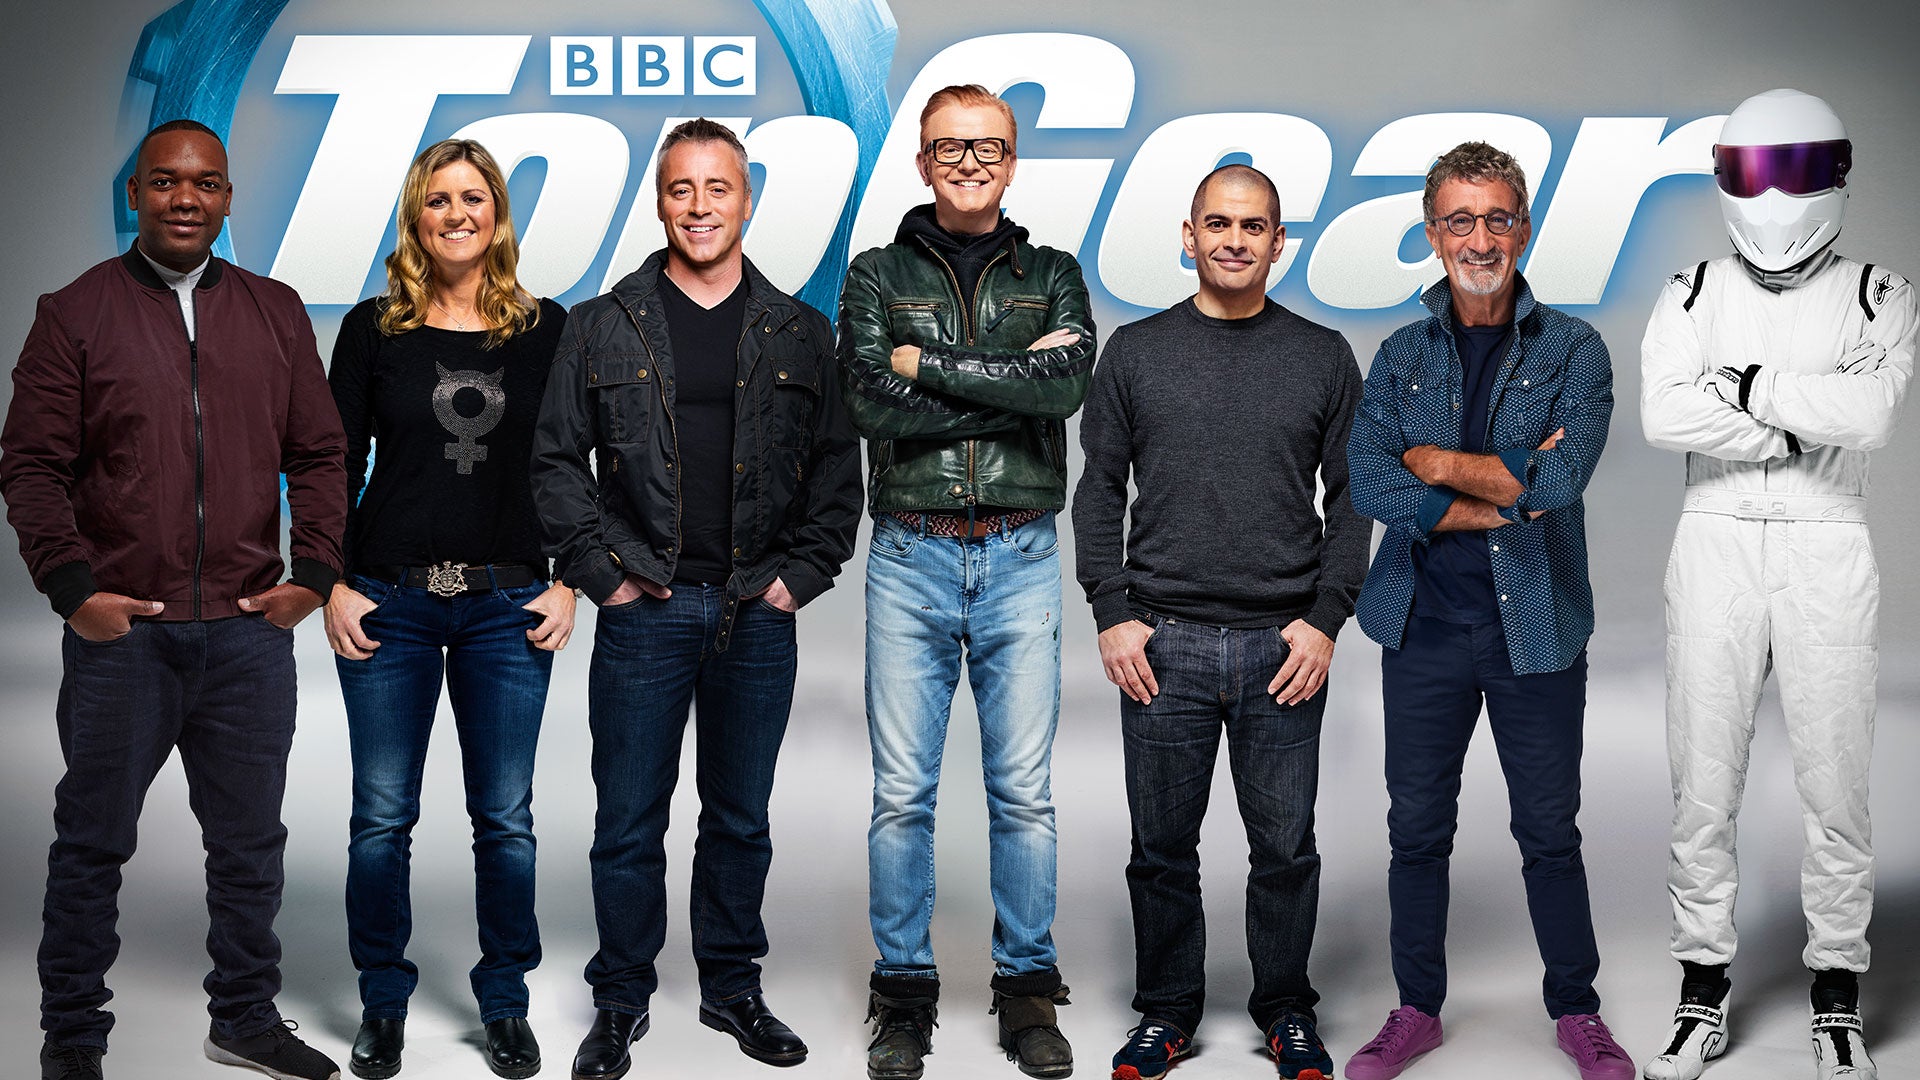 Chris Evans and his Top Gear team prepare to go head-to-head with Clarkson's new motoring show